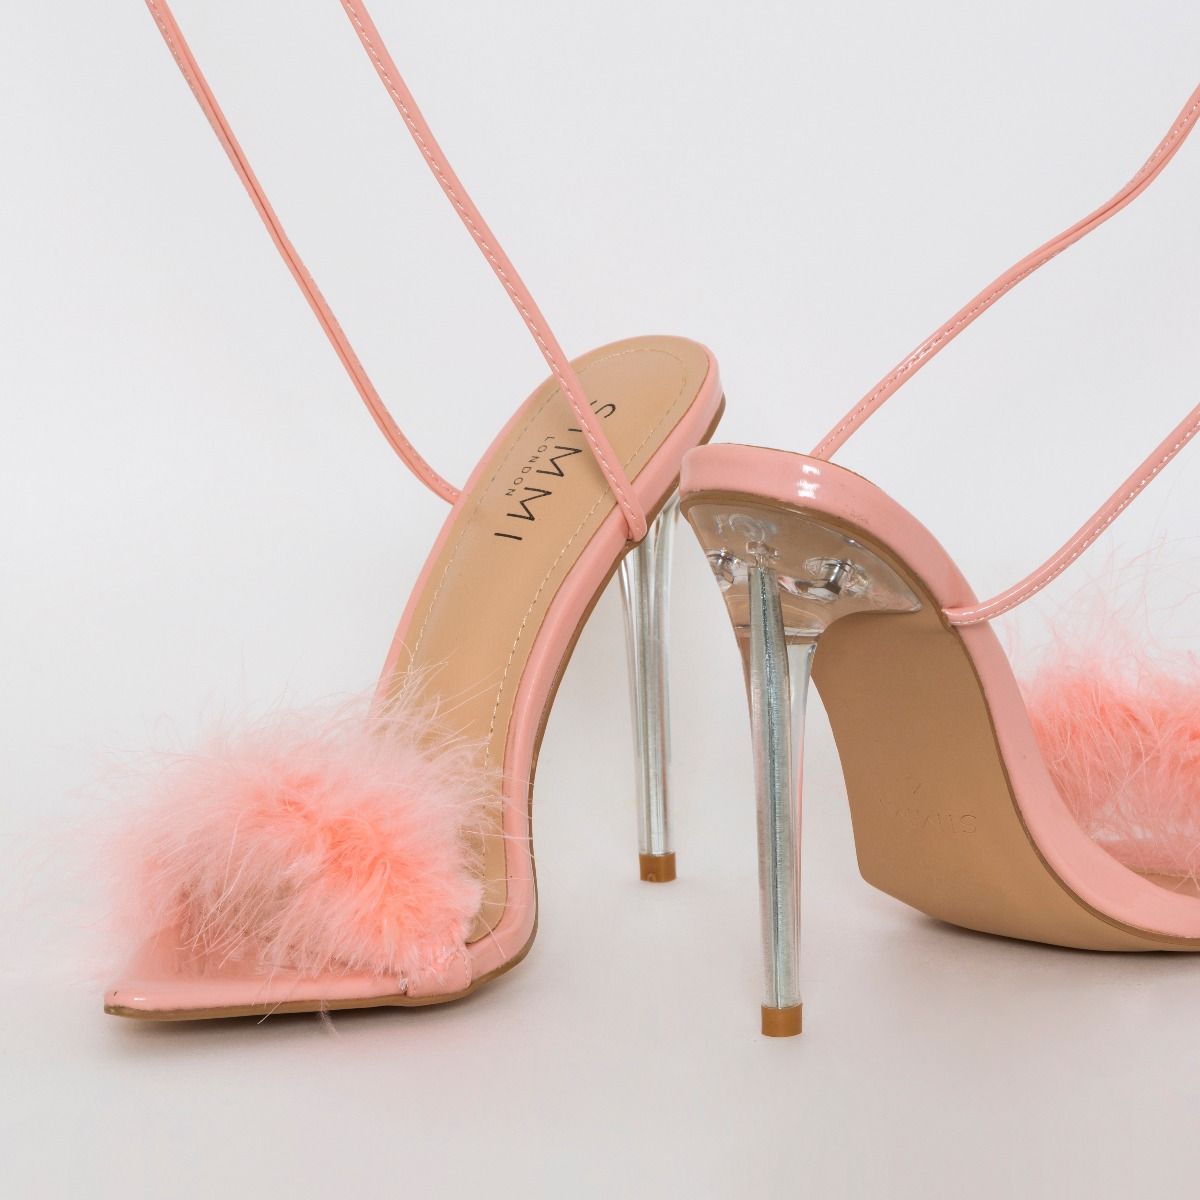 Obey Fluffy Pink Patent Lace Up Stiletto Heels